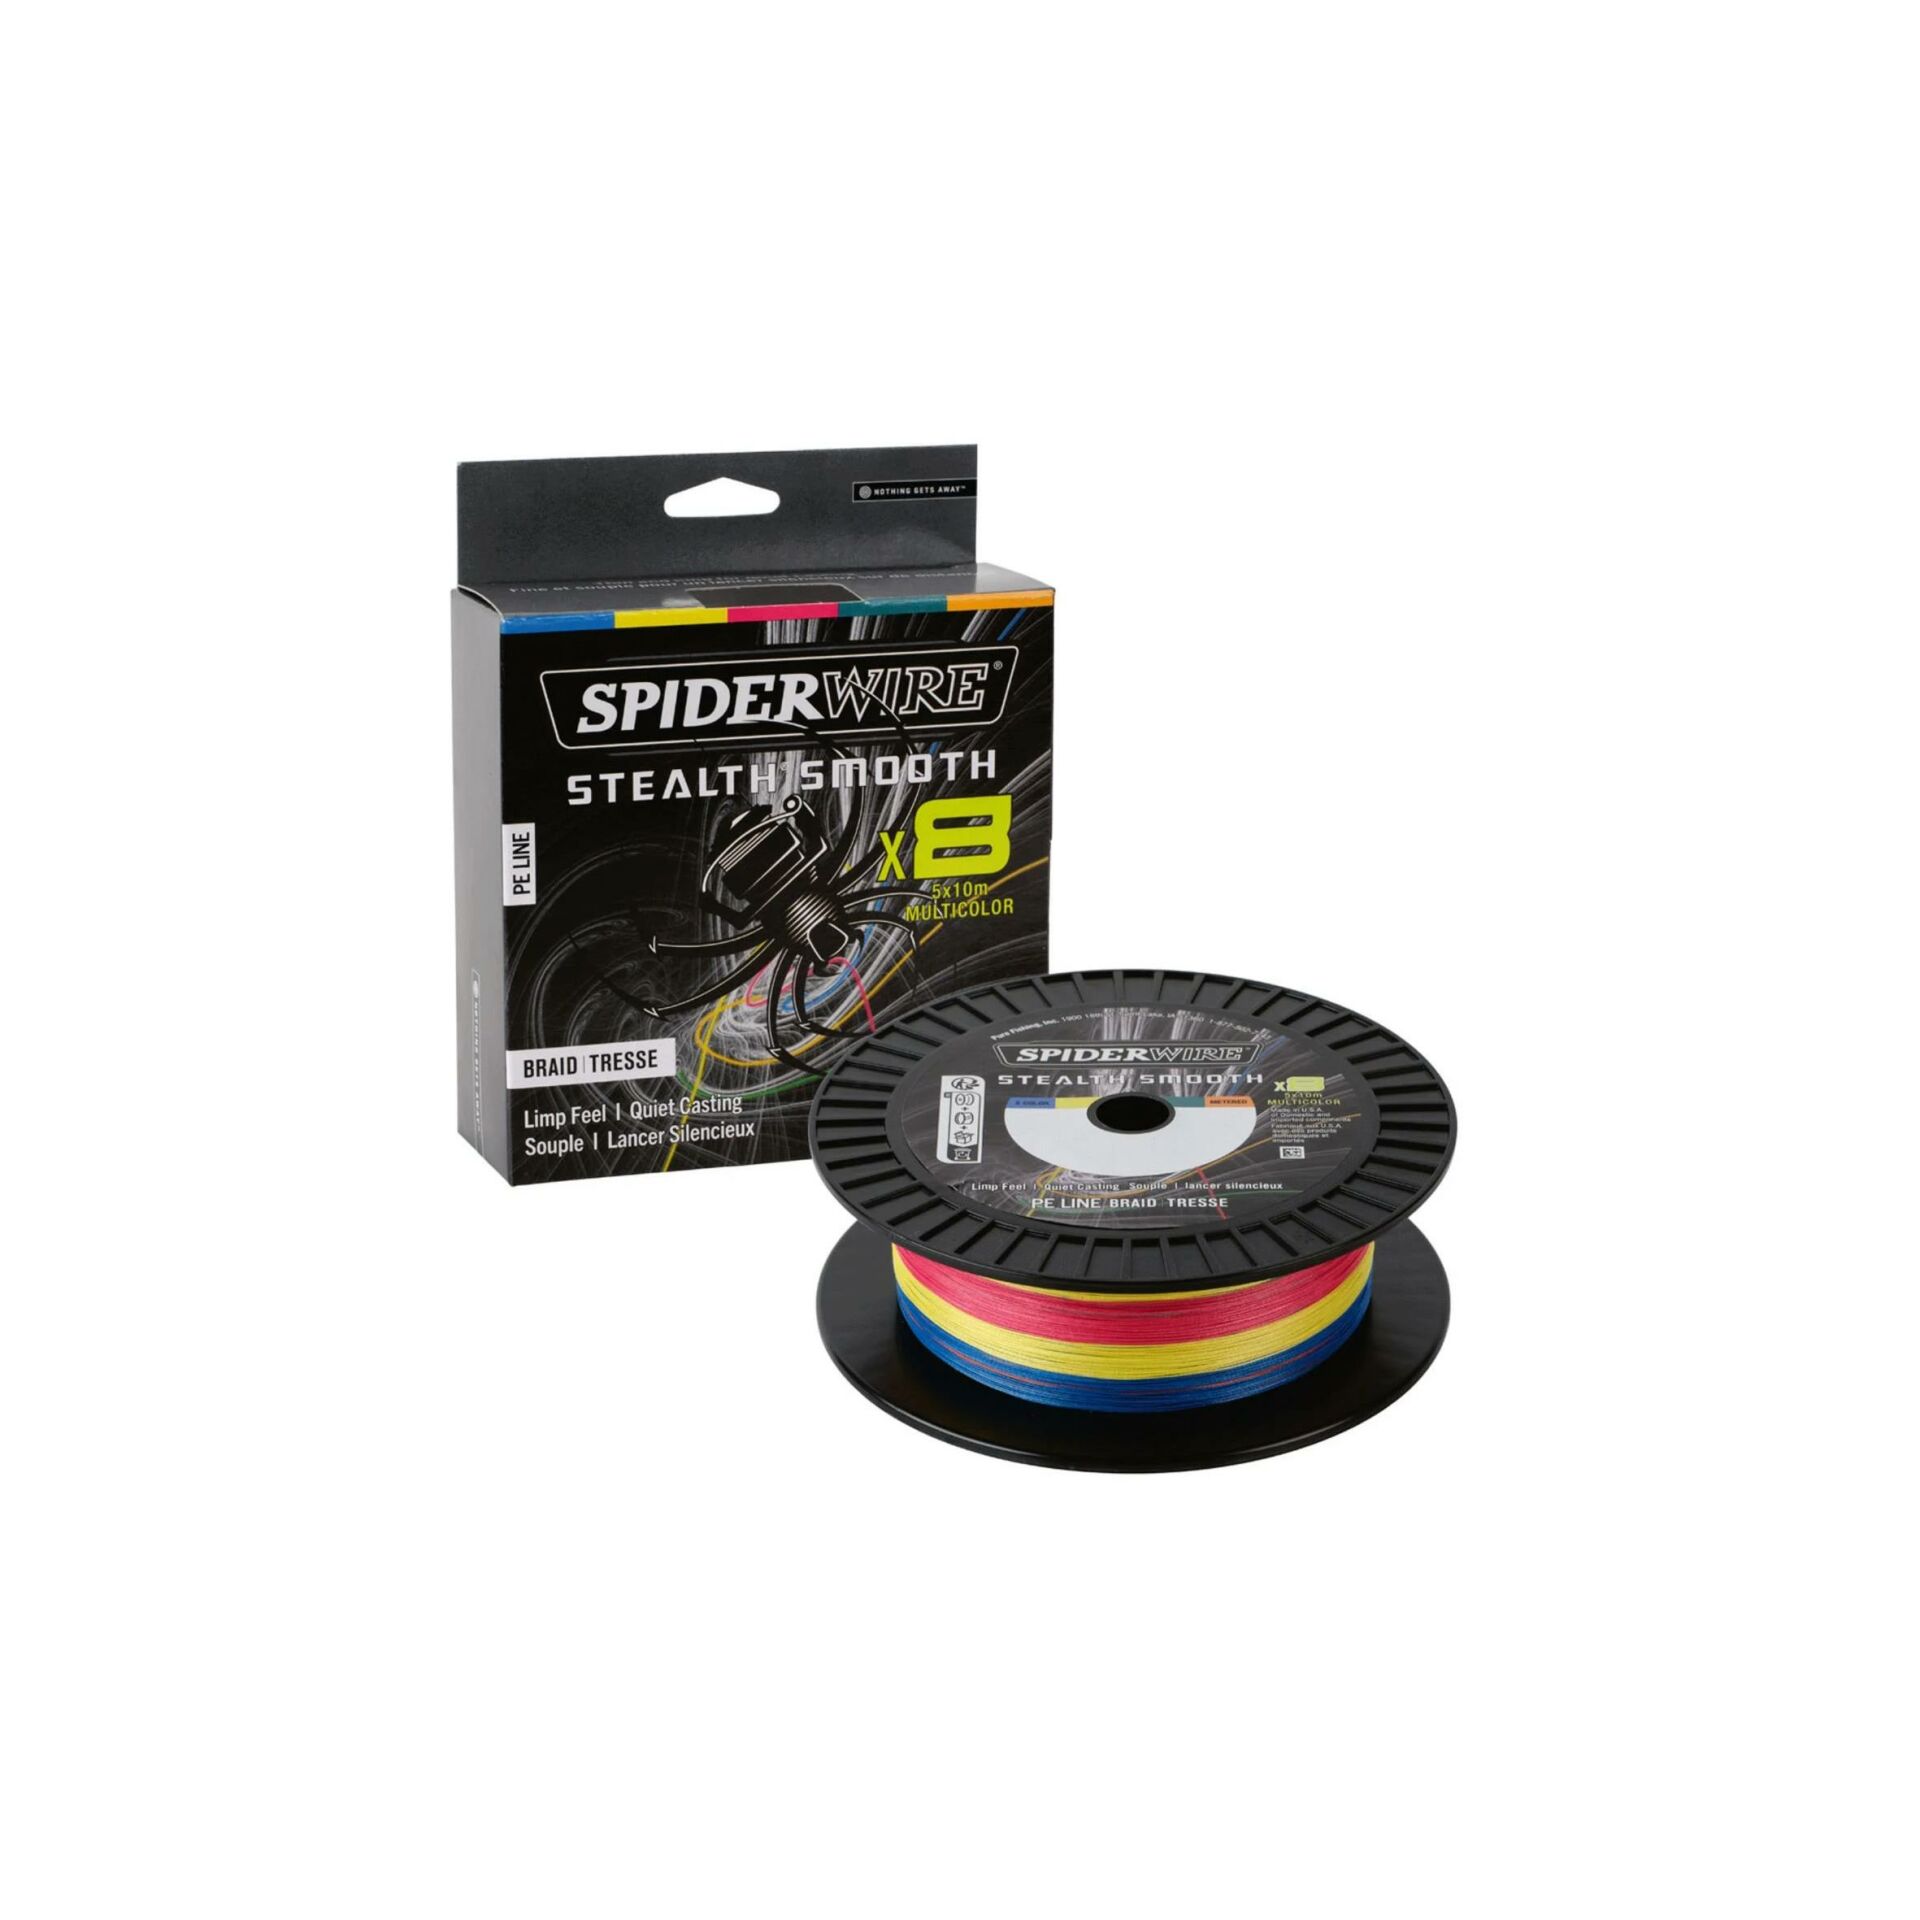 Spider Wire Stealth Smooth x8 300 m Multicolour 0.33mm